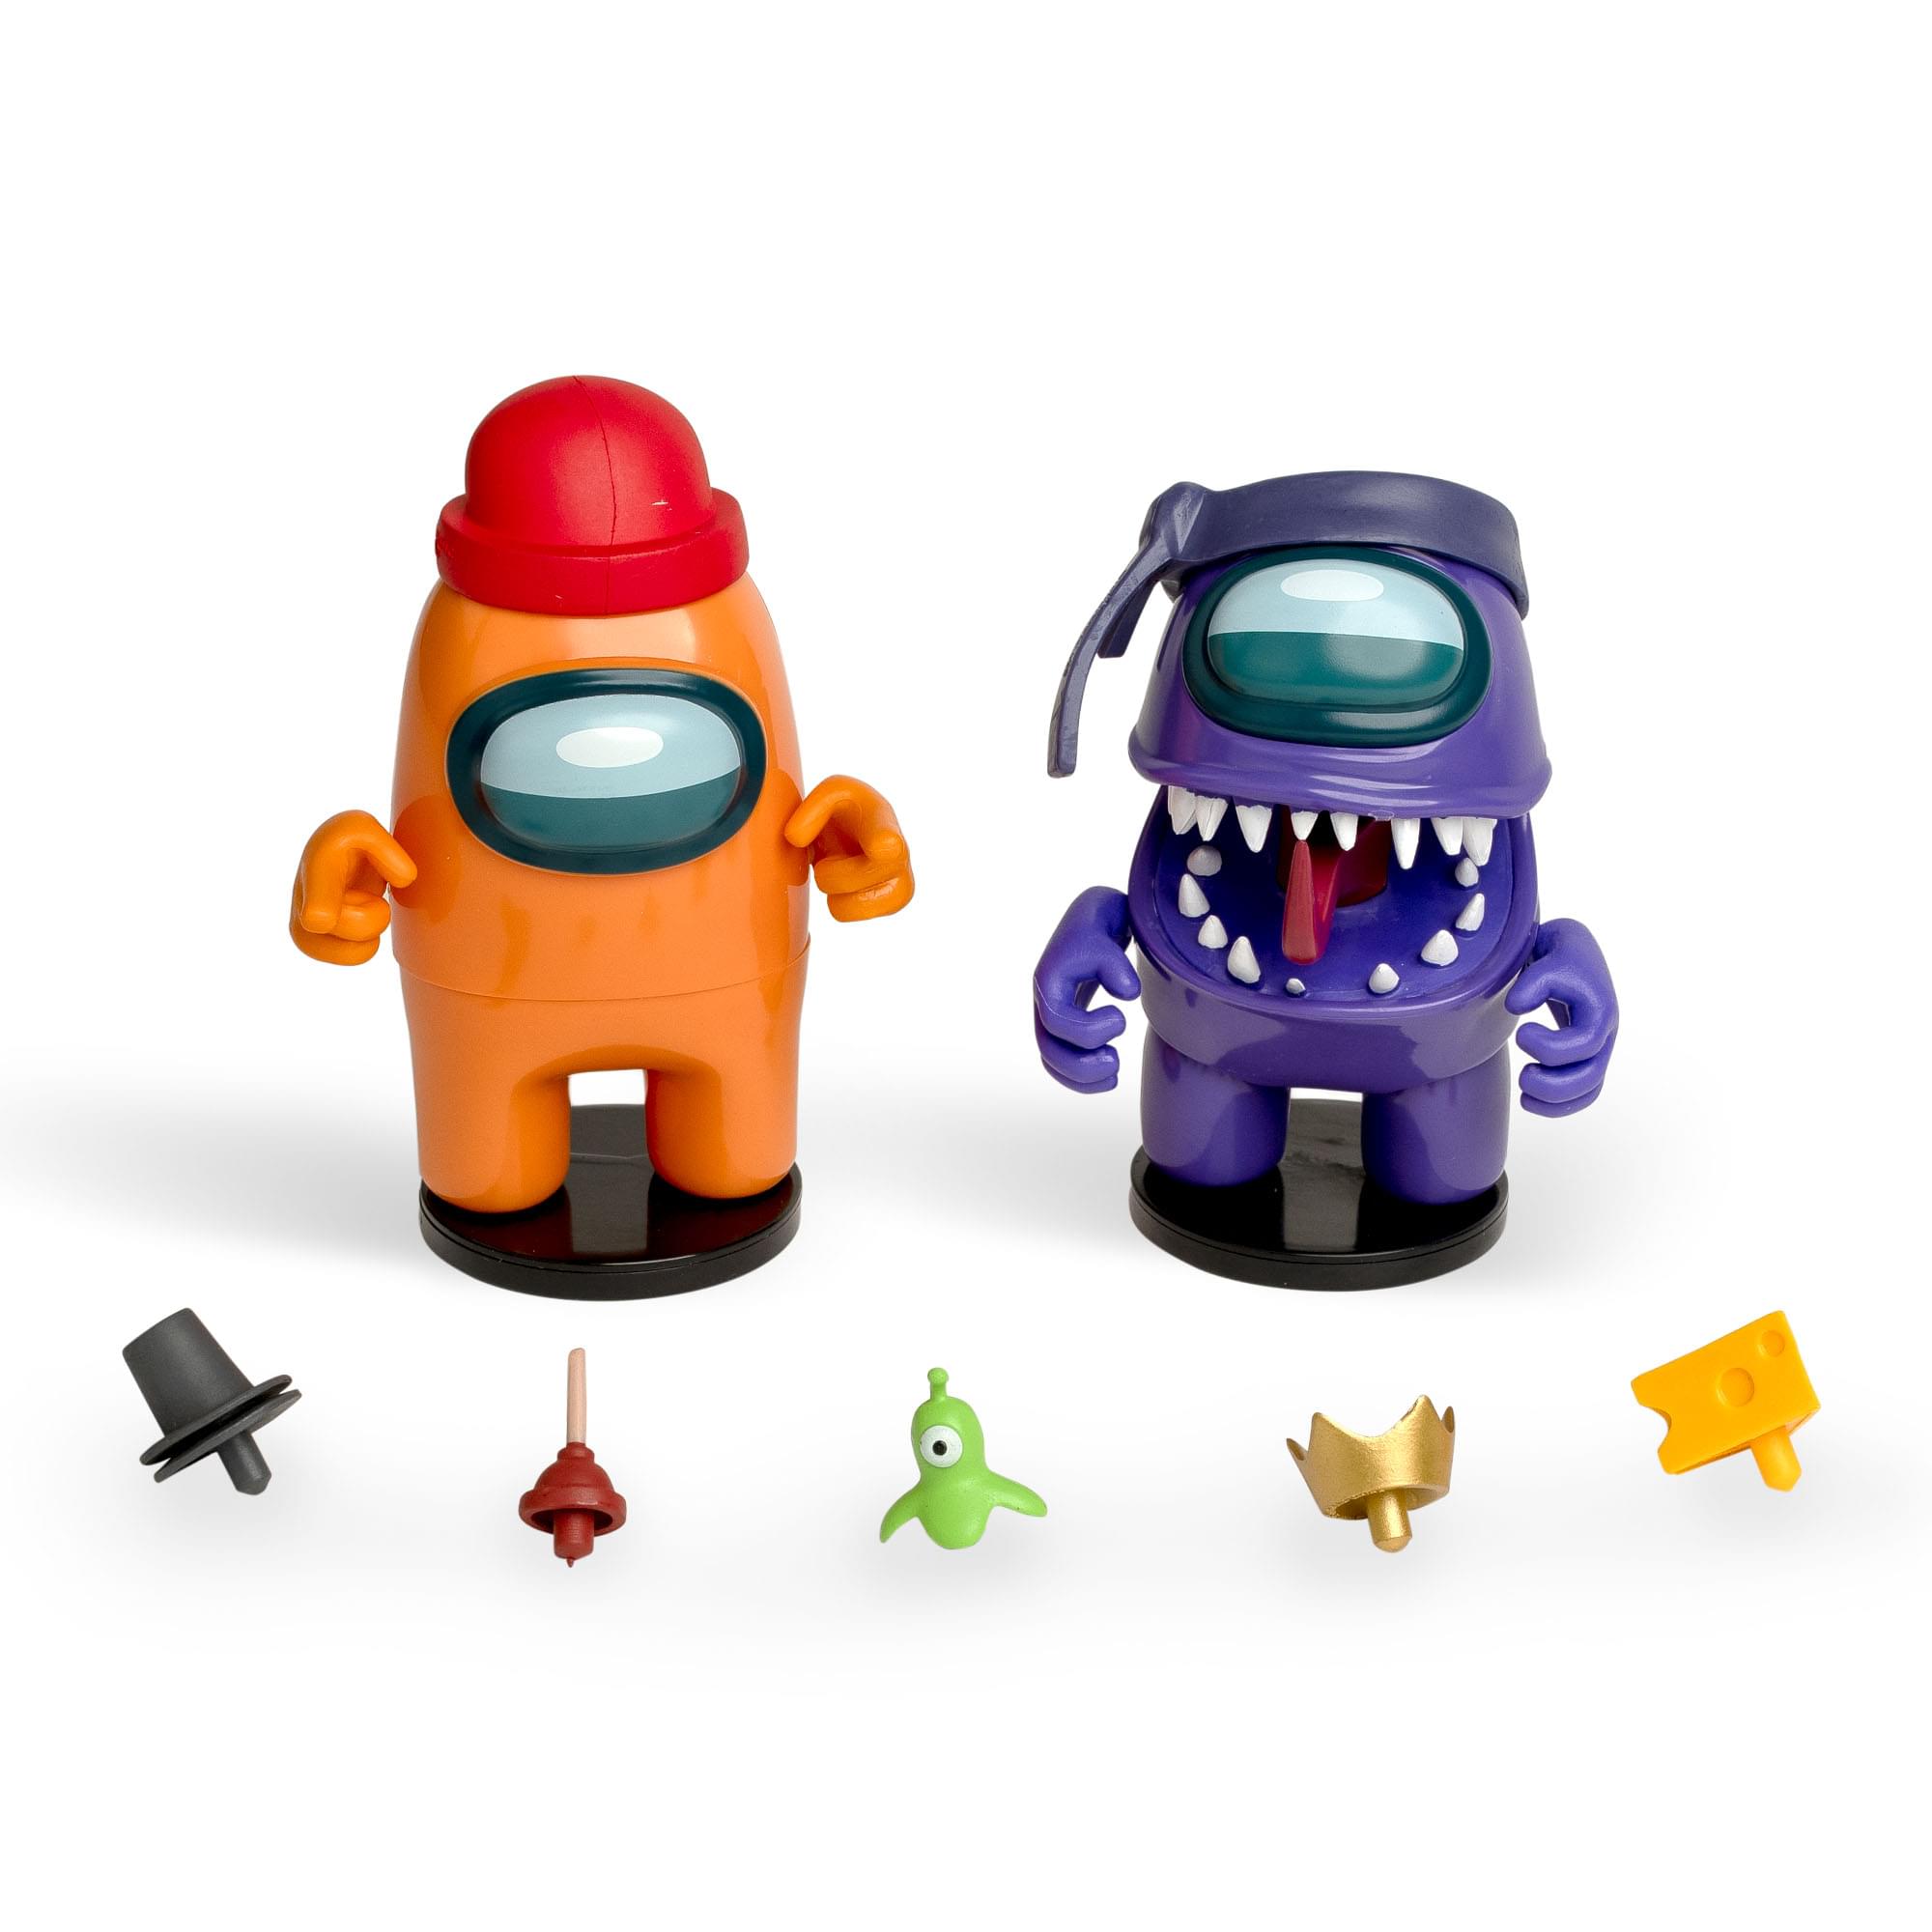 Among Us 4.5 Inch Figure Set With Stampers , Orange Crewmate & Purple Imposter